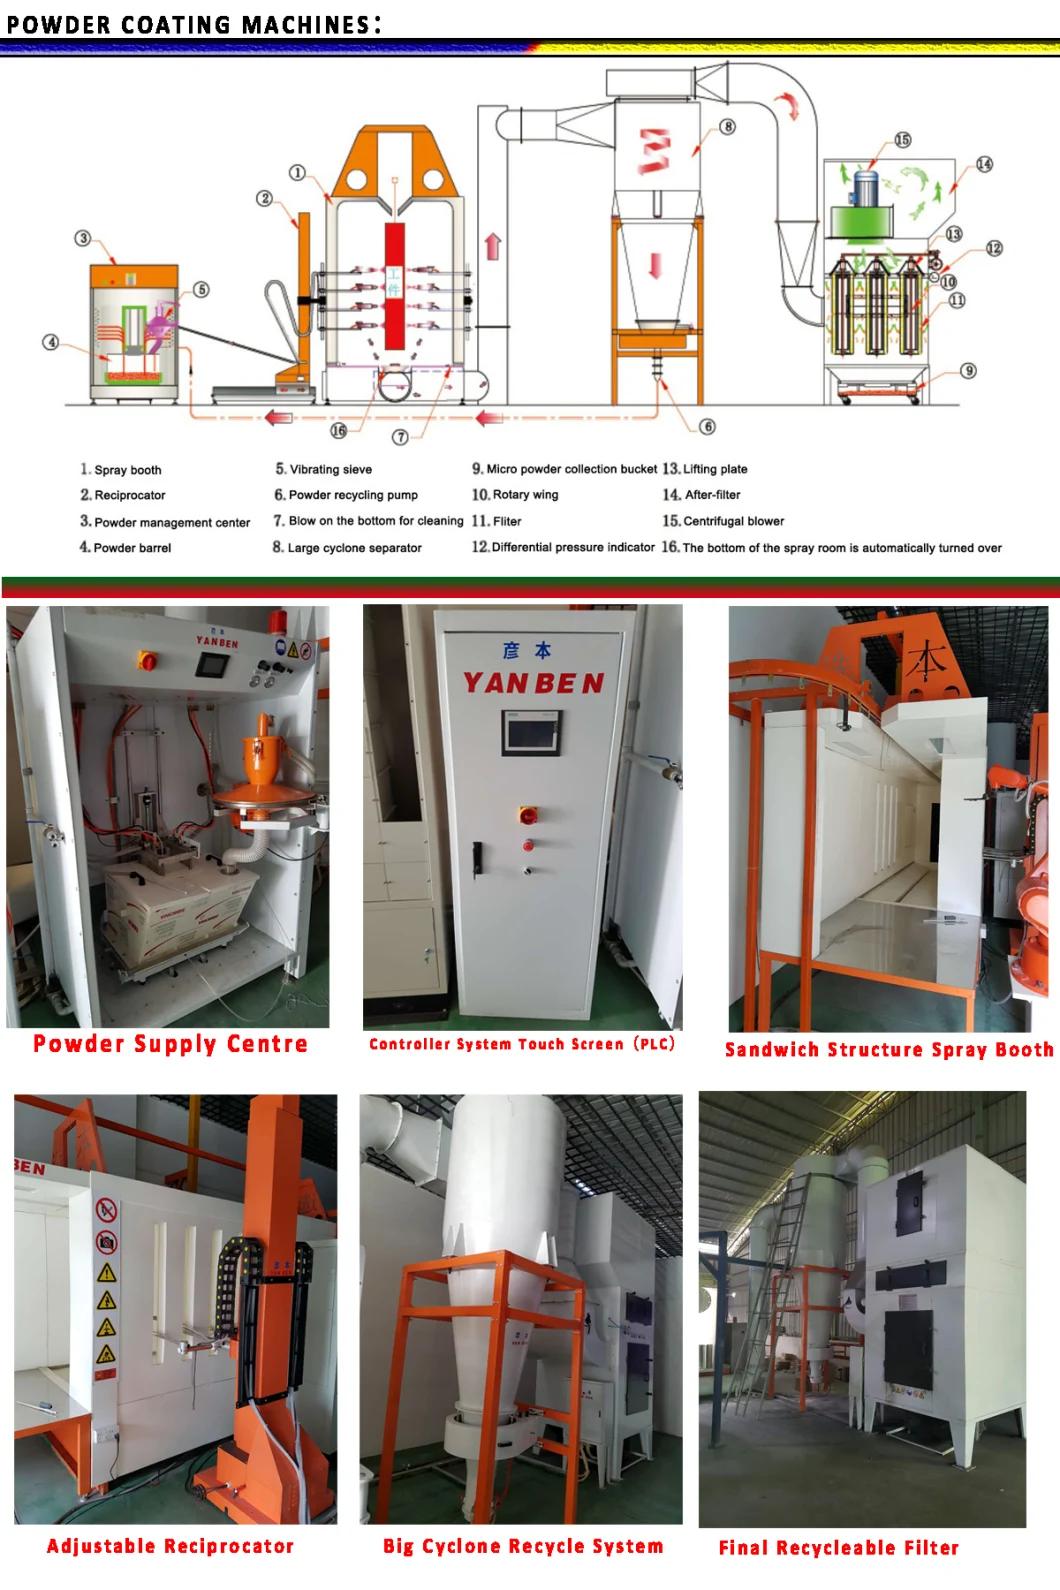 Automatic Powder Coating Booth Large Cyclone Recycling System